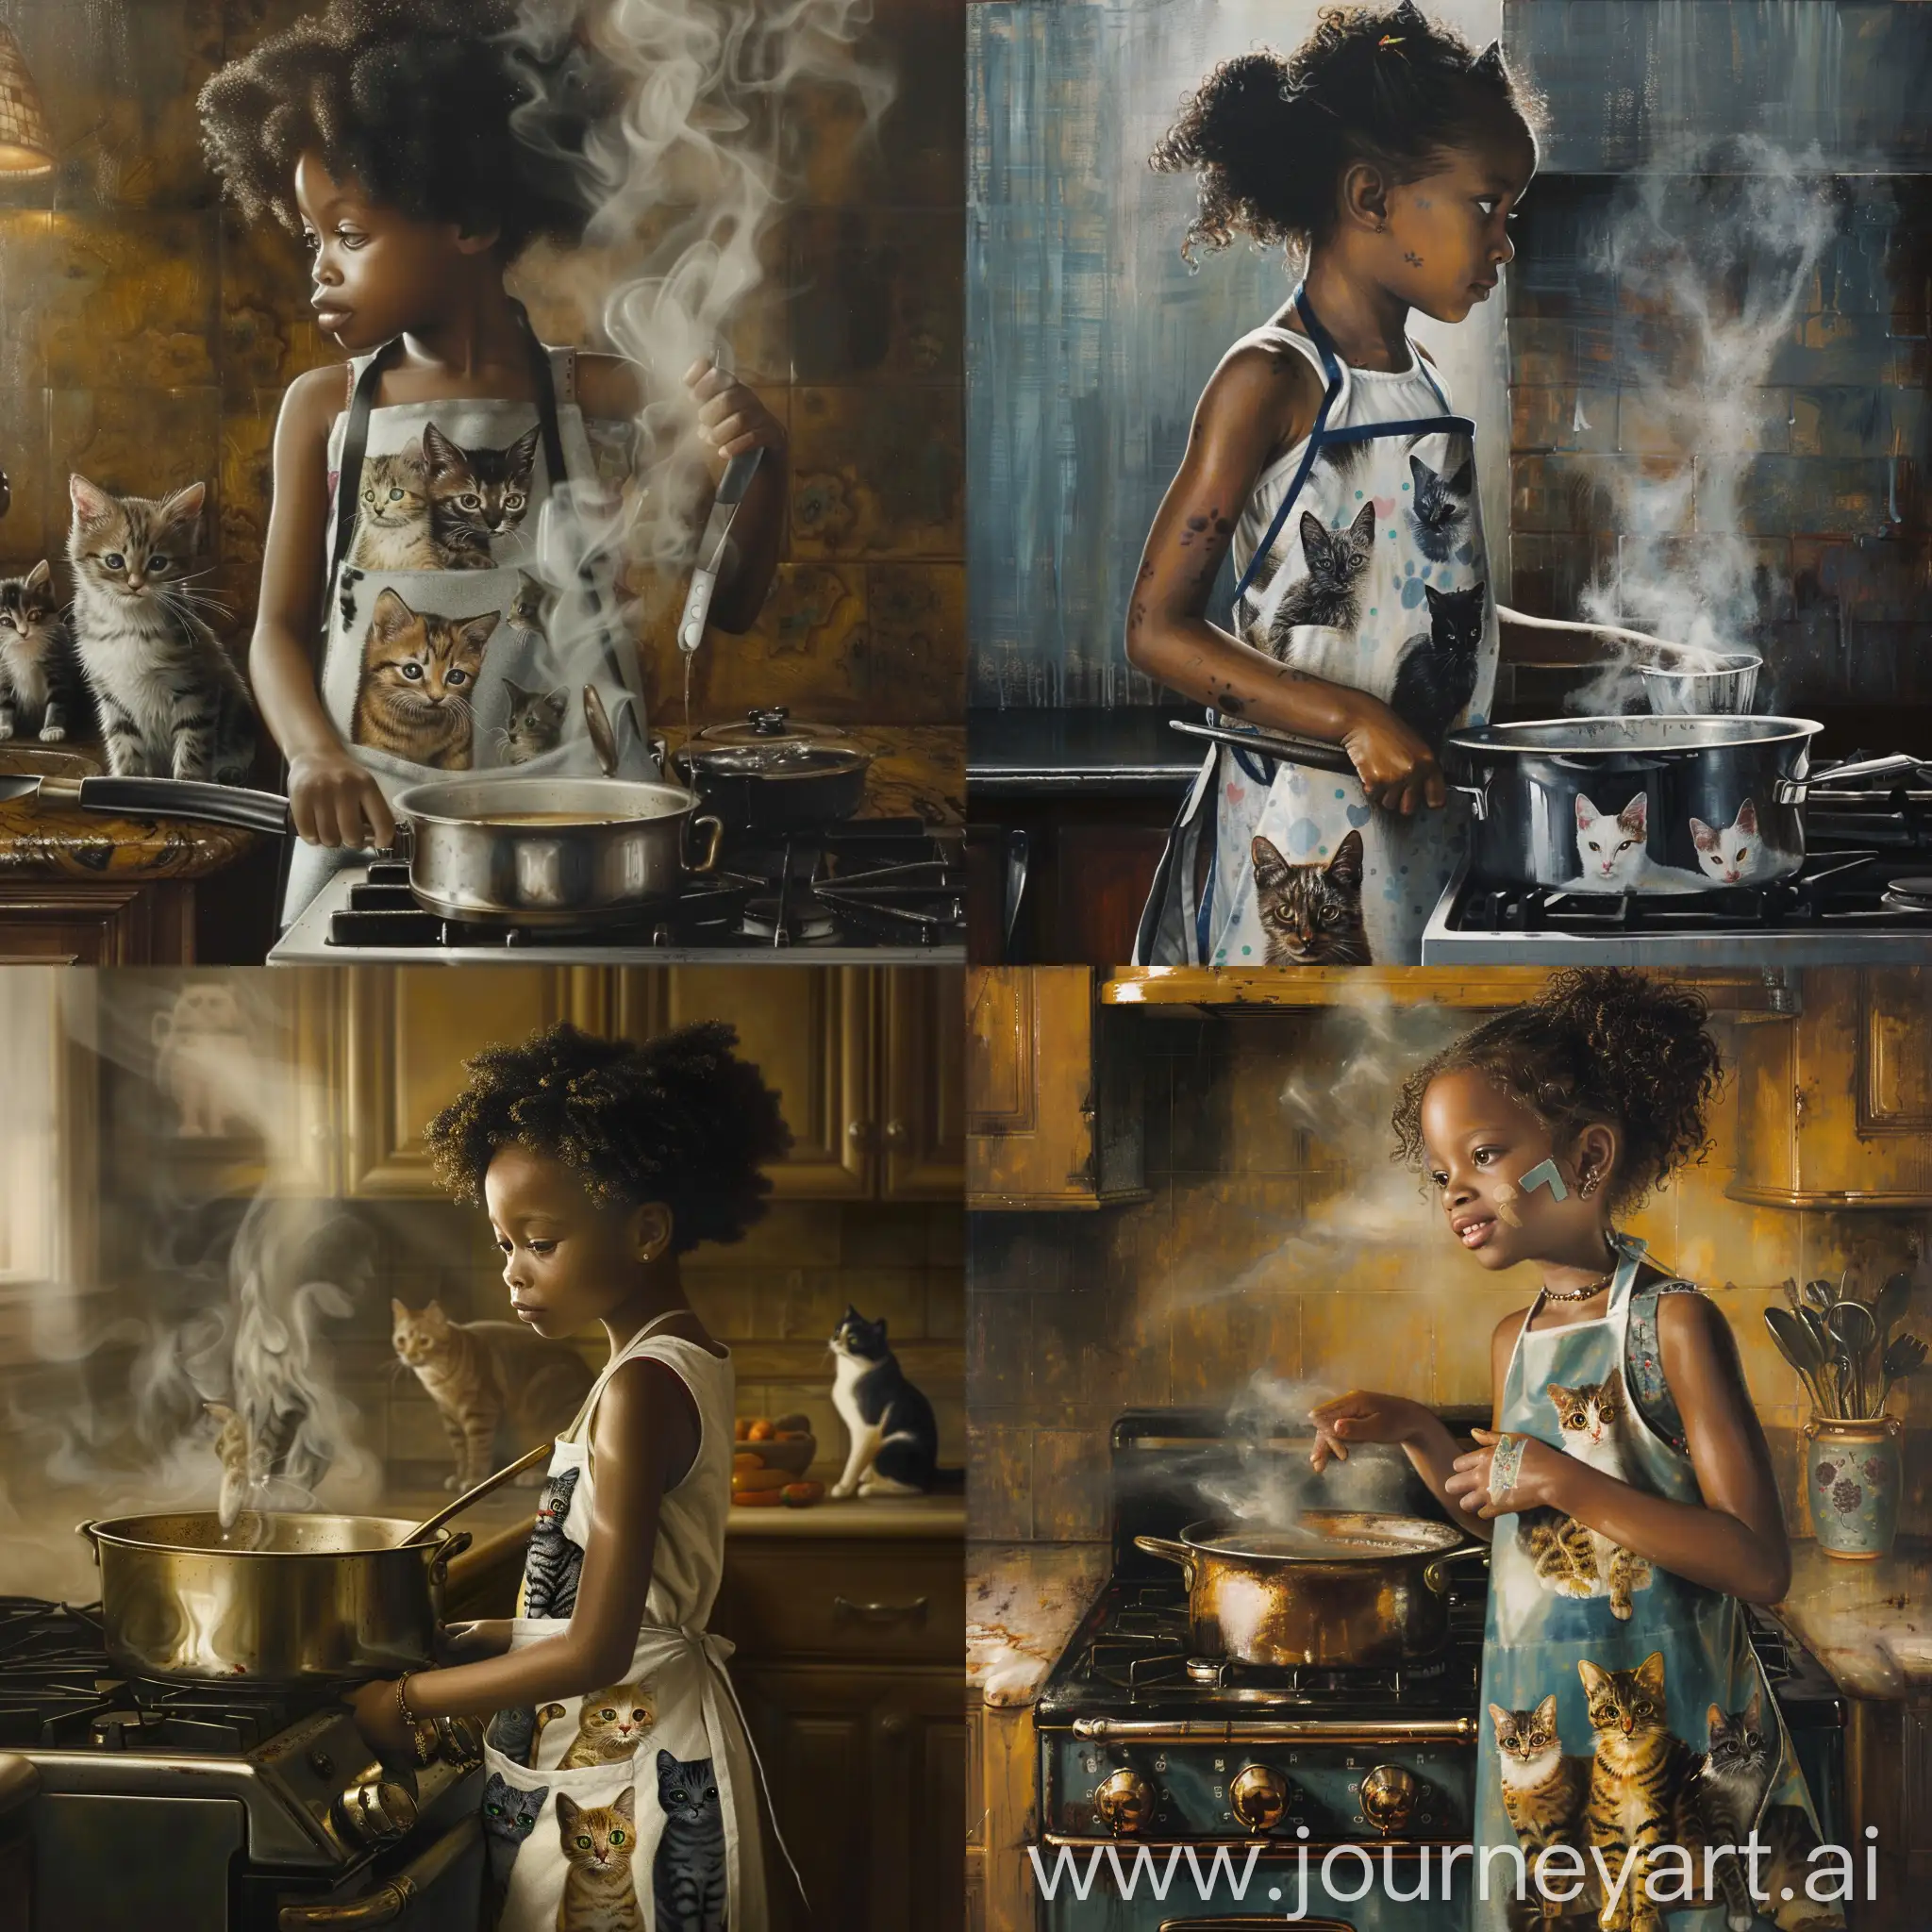 Young-Black-Girl-Cooking-in-Cat-Apron-Kitchen-Stove-Scene